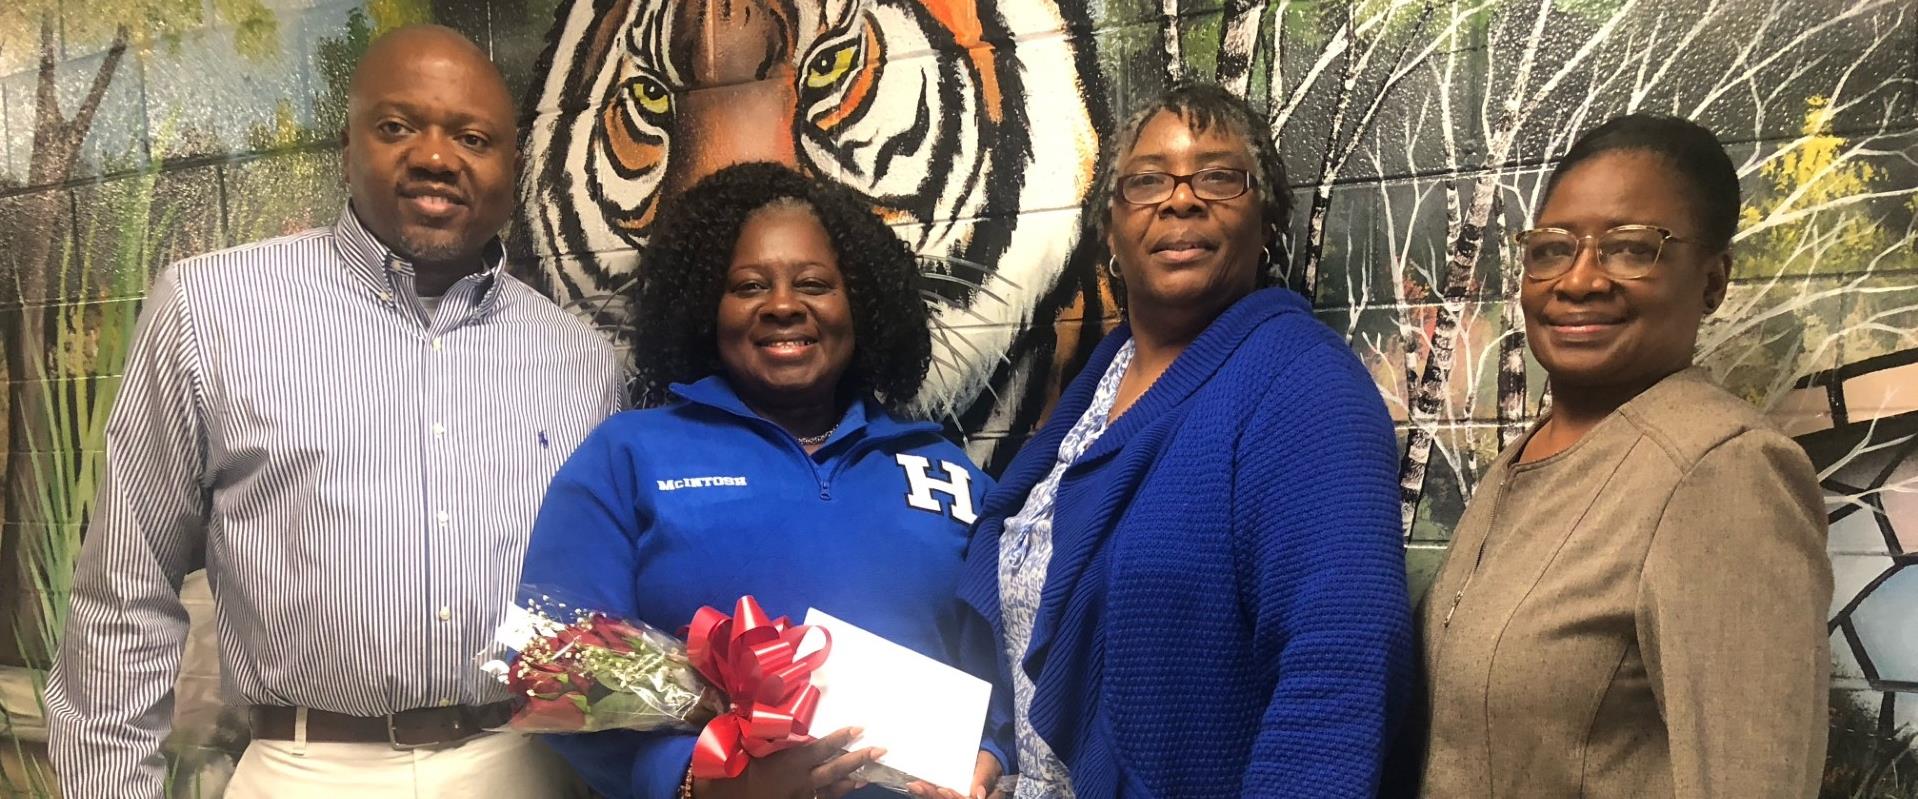 school counselor presented with flowers from principal and assistant principal